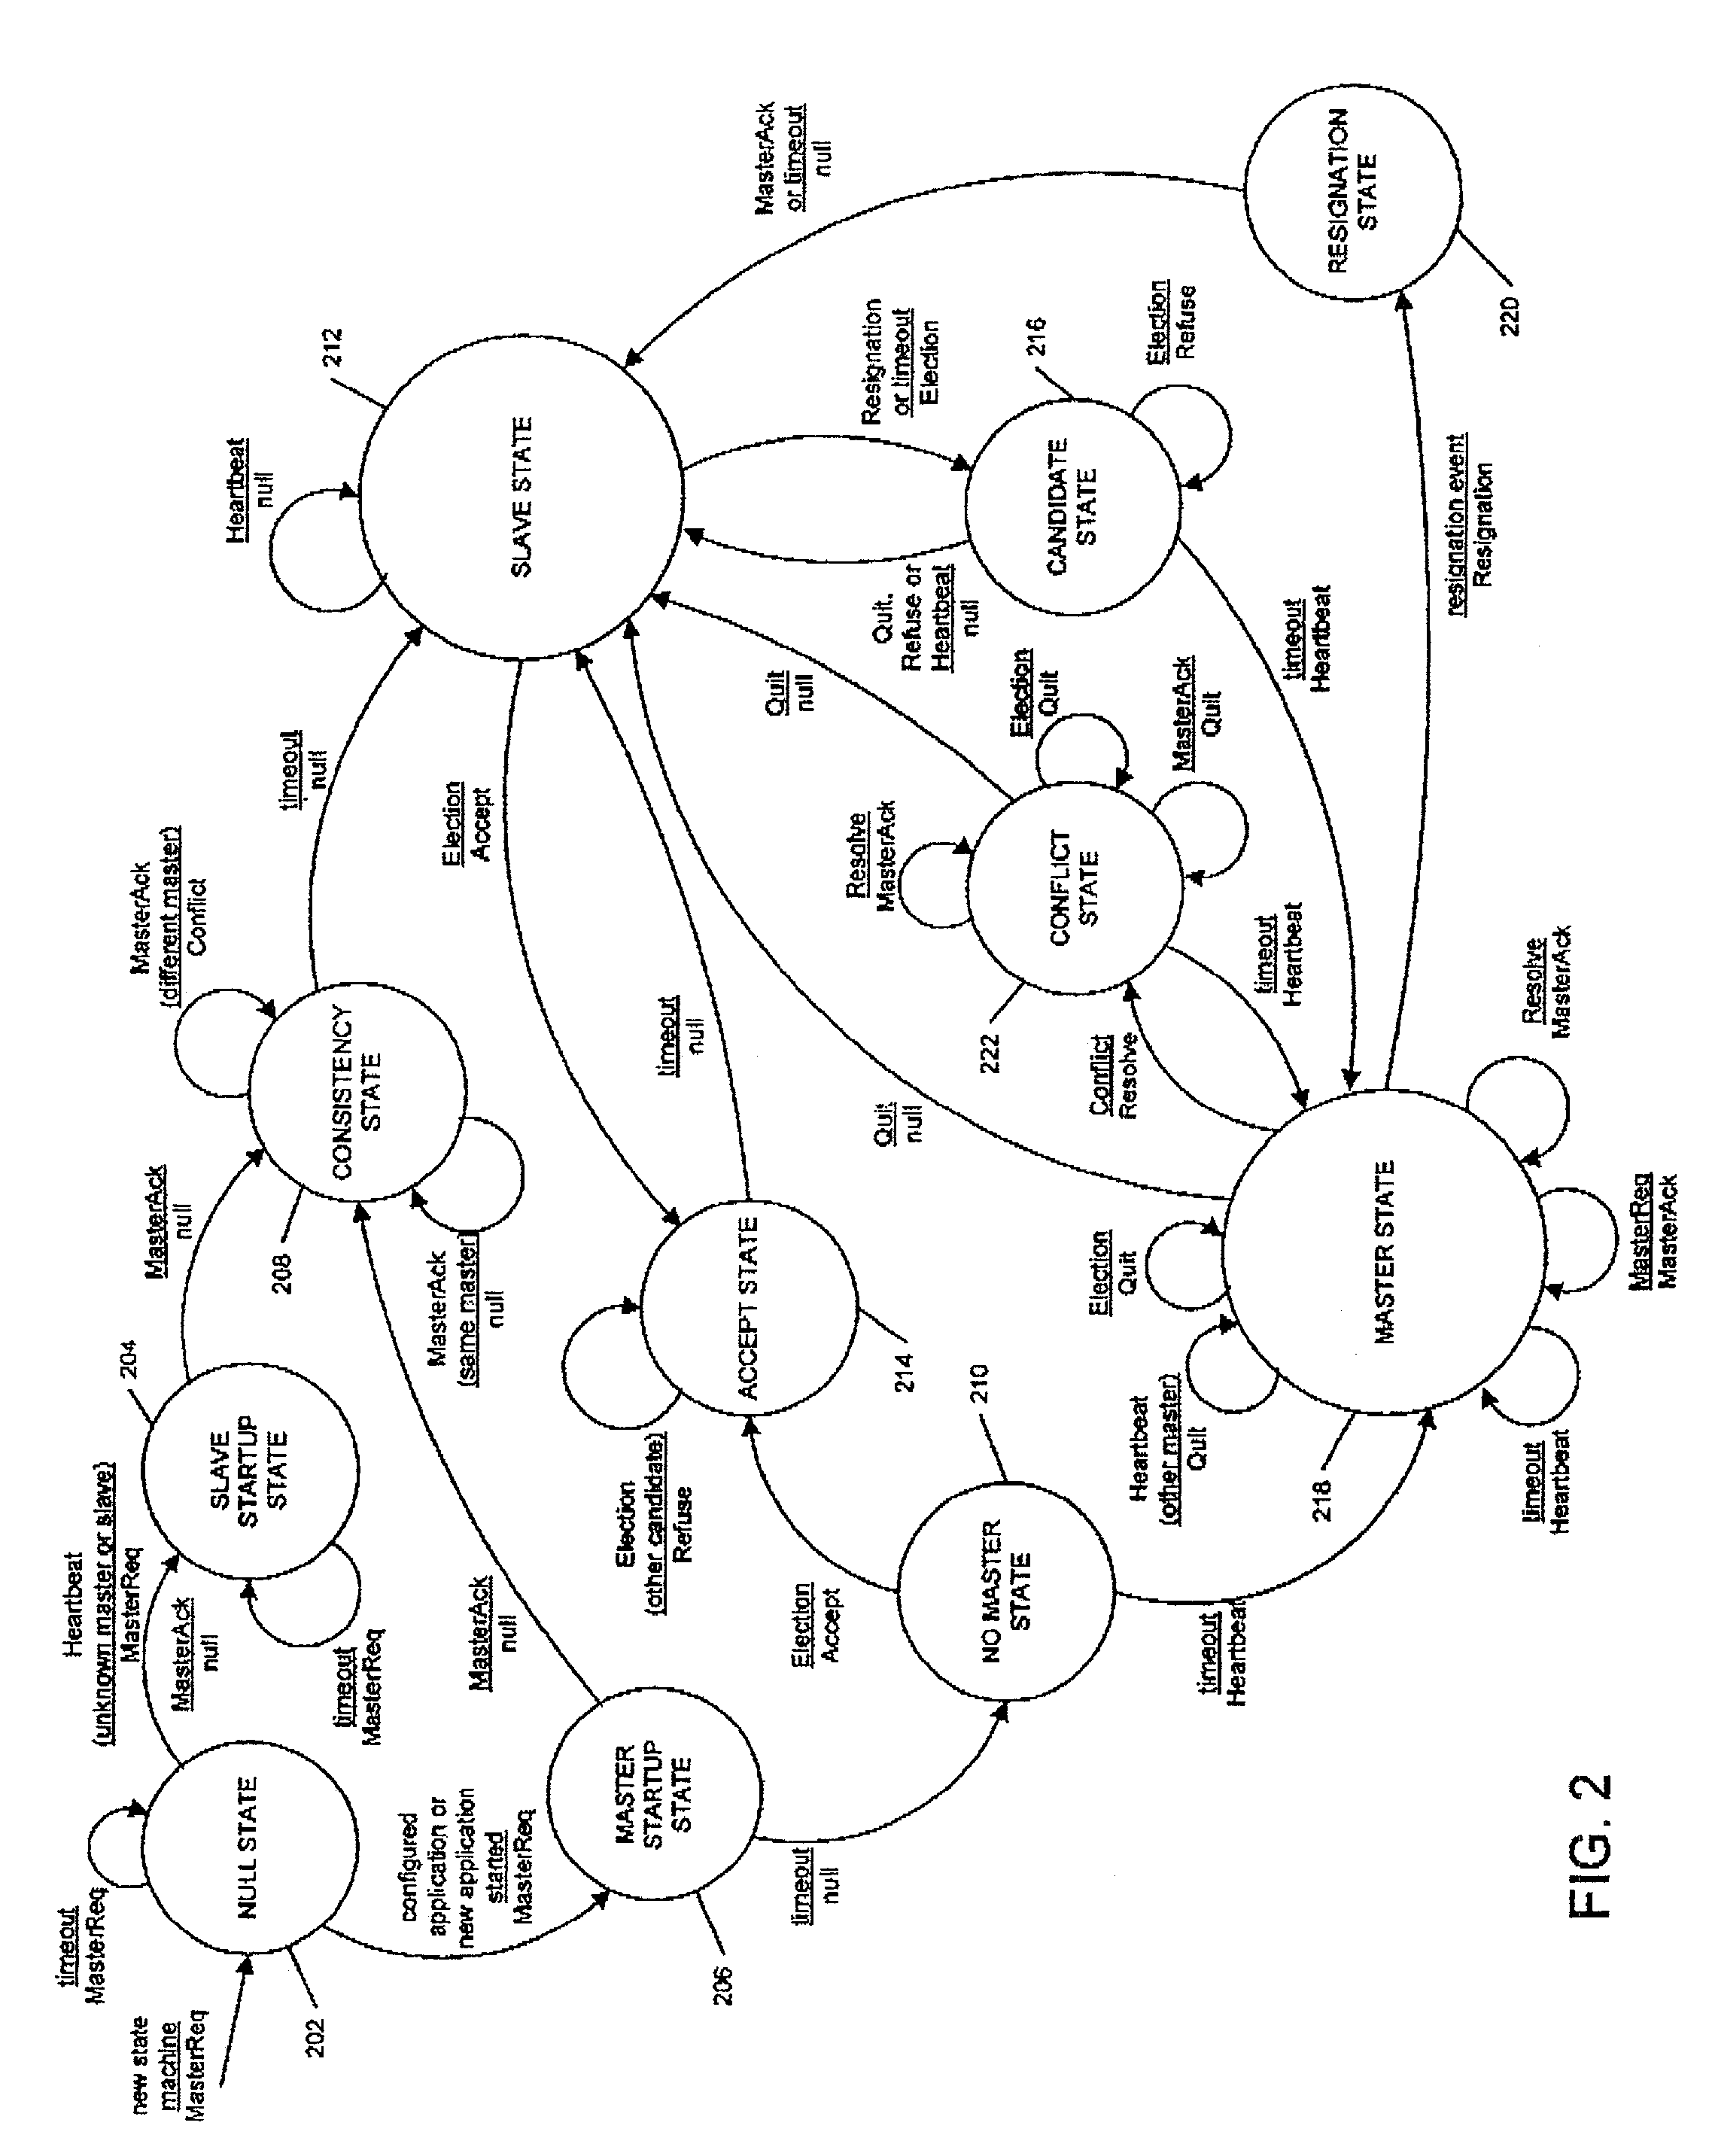 Method and apparatus for exchanging heartbeat messages and configuration information between nodes operating in a master-slave configuration